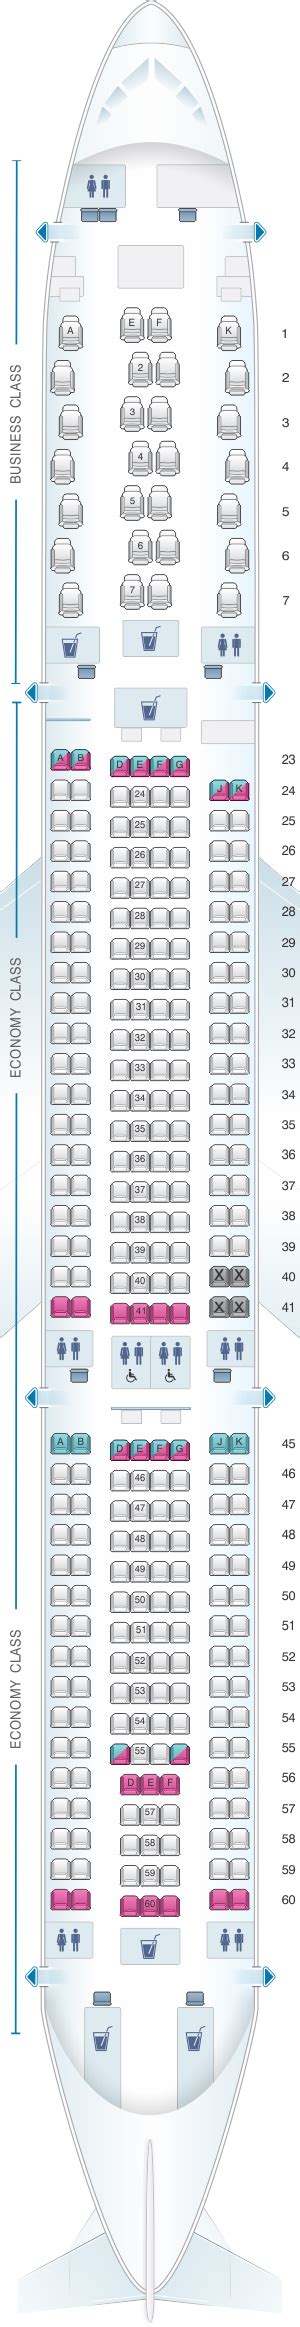 Seating a330-300. Airbus A330-300 (333) Seat Map; Info; Photos; Click any seat for more information. Key ... 